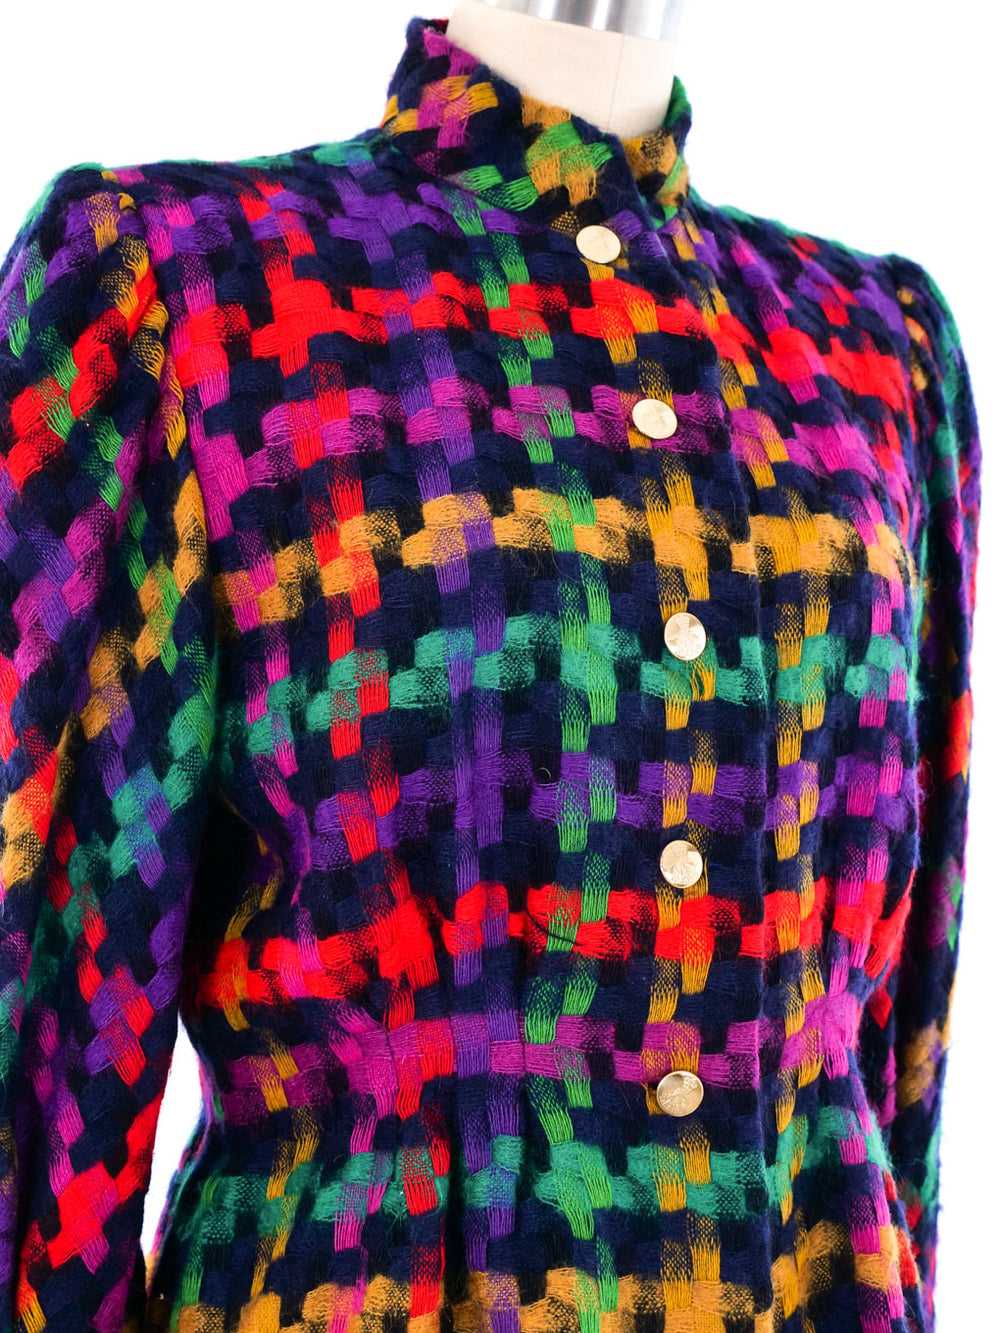 Pauline Trigere Woven Blazer with Scarf - image 5